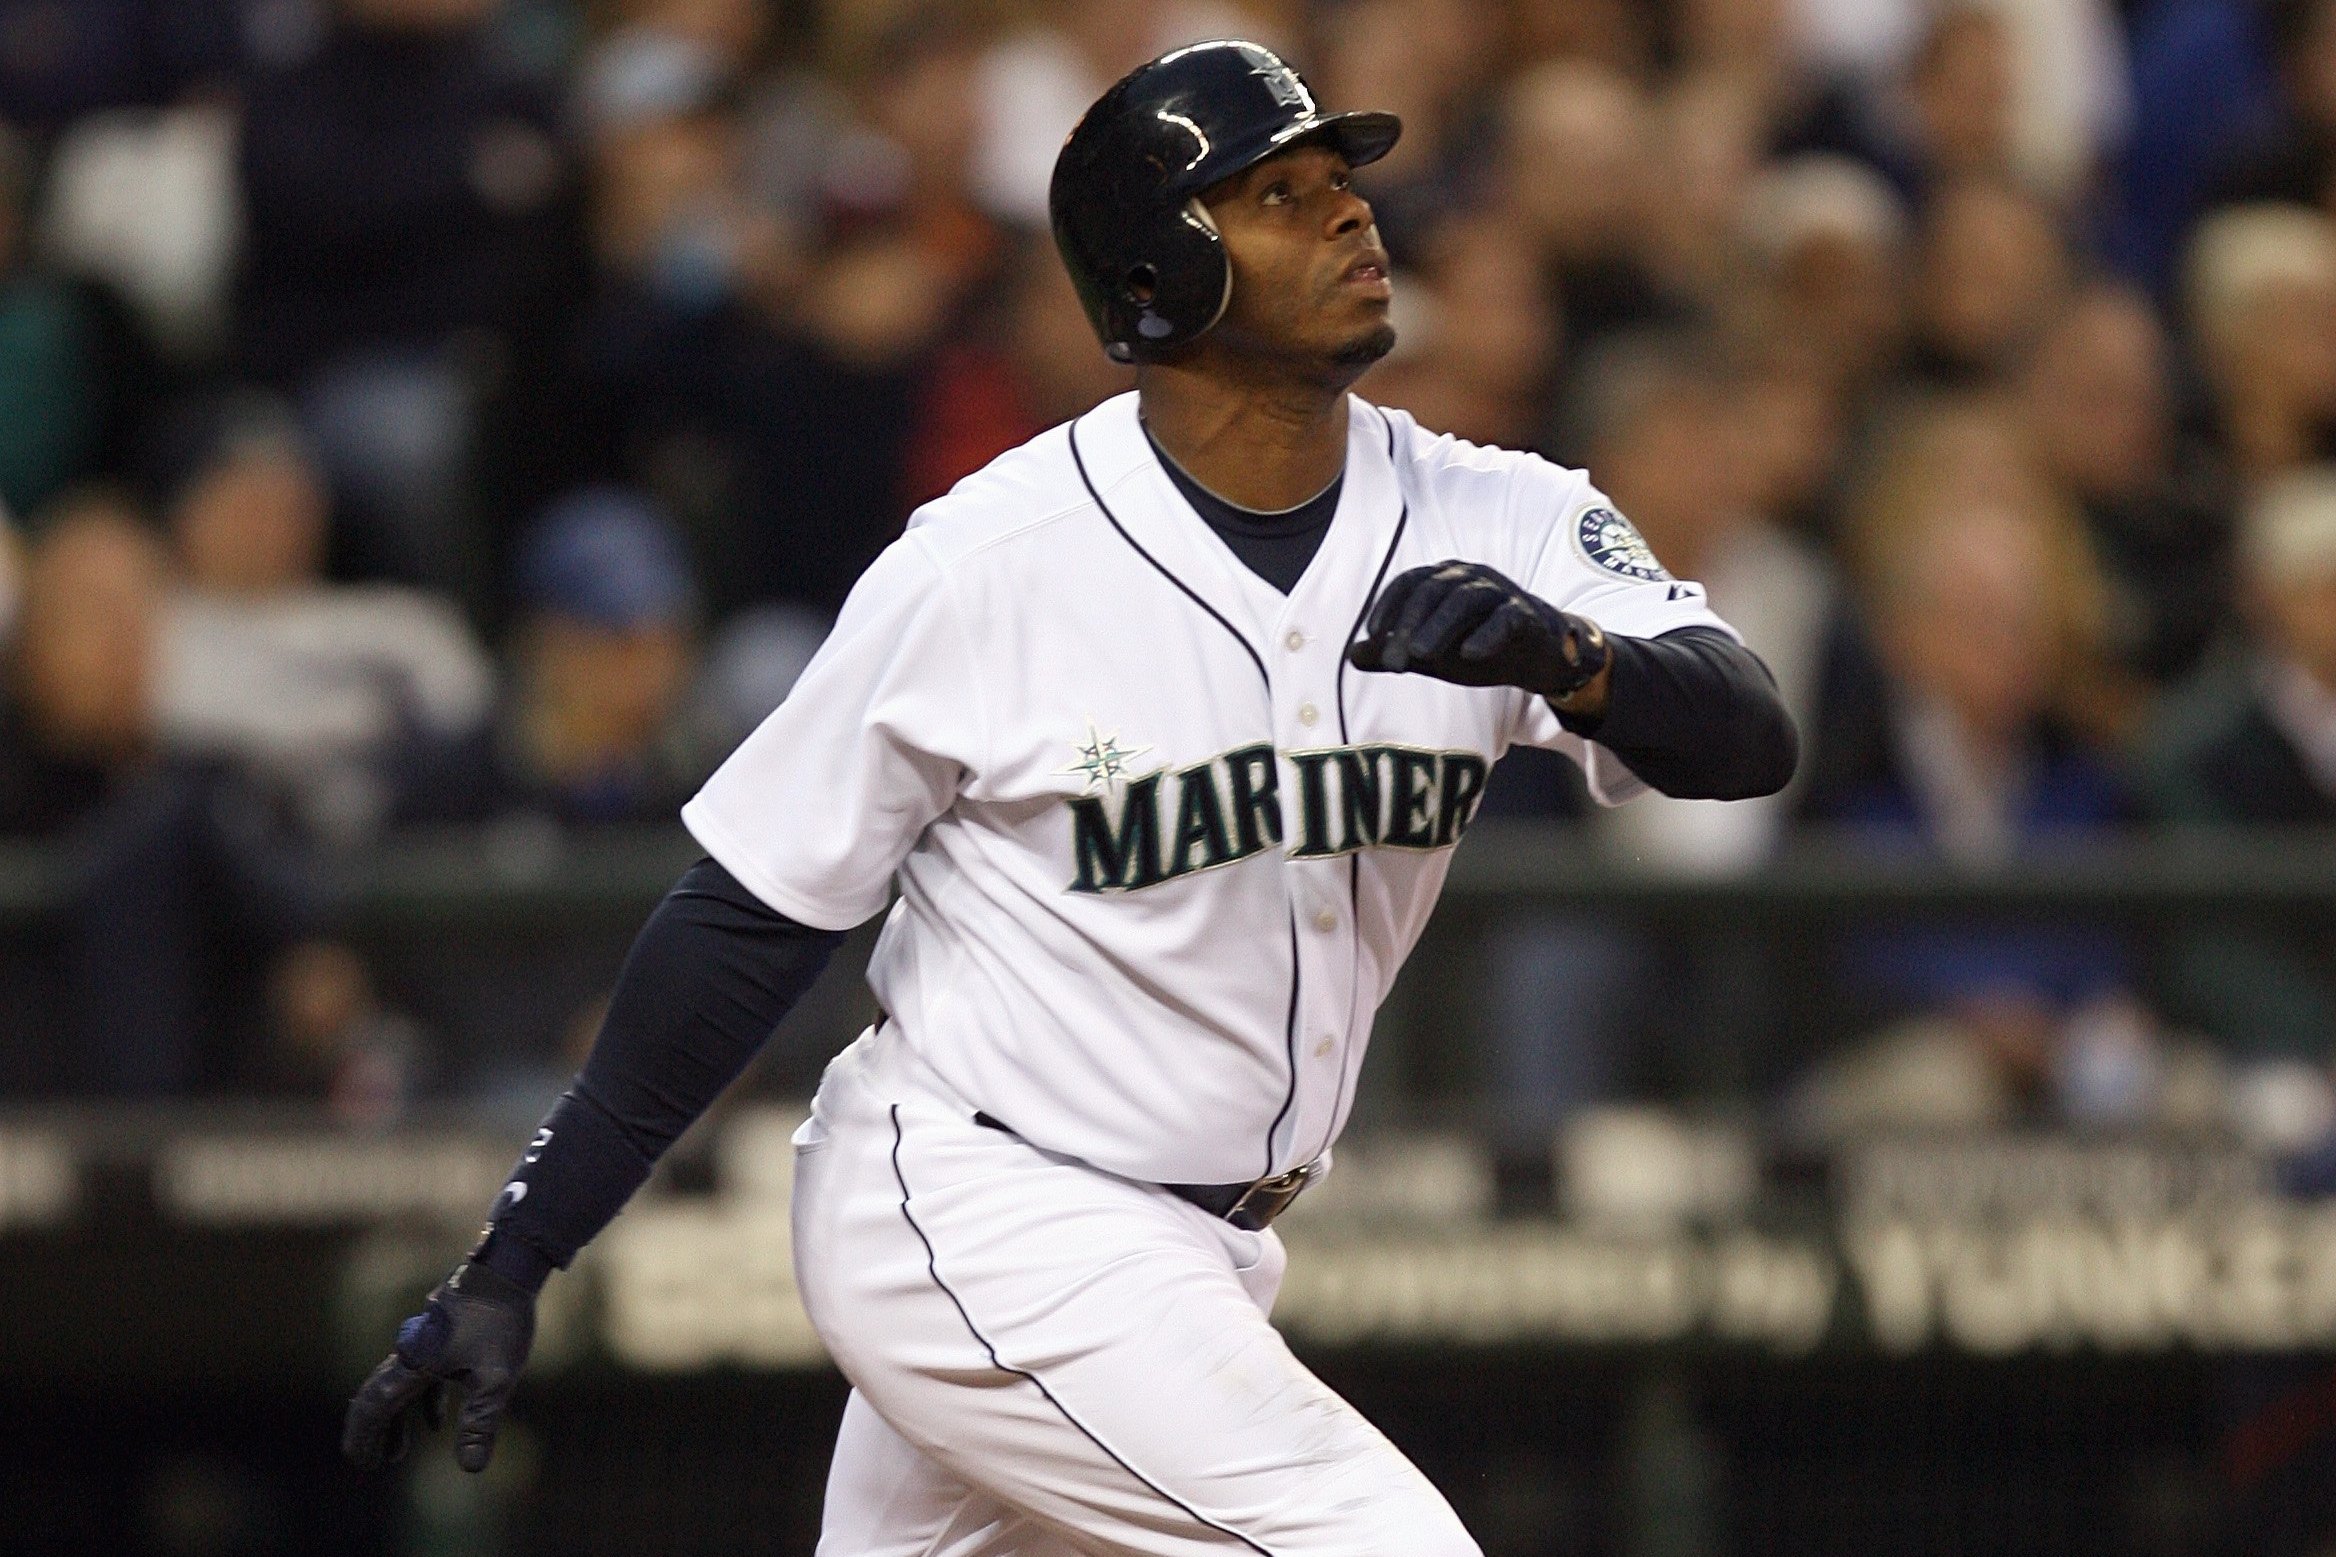 On This Date: Mariners Retire Ken Griffey Jr.'s Number 24, by Mariners PR